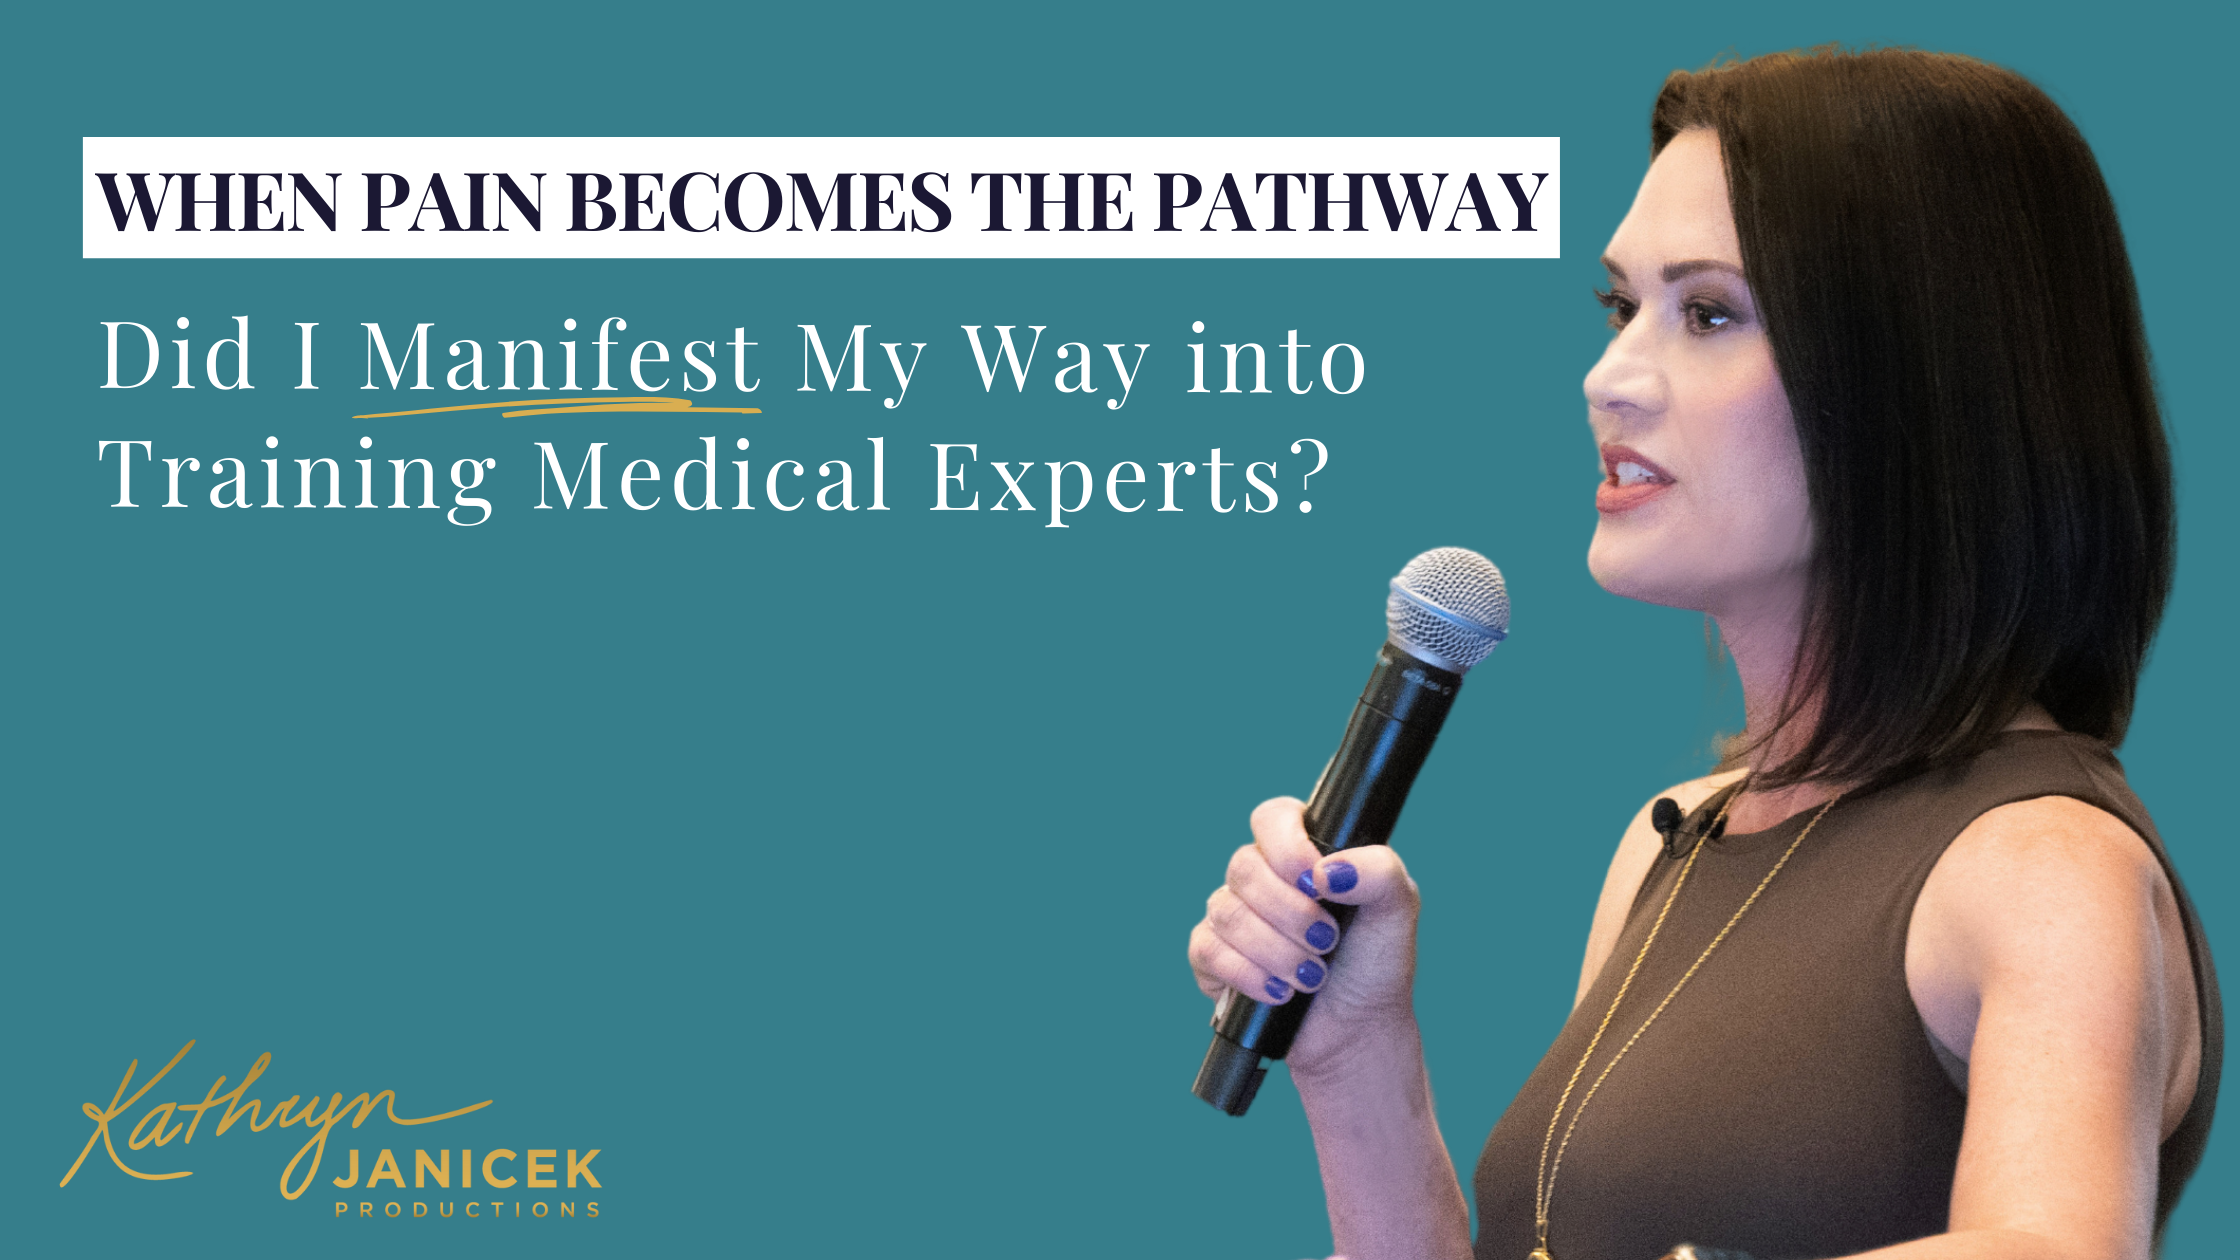 Did I Manifest My Way into Training Medical Experts?